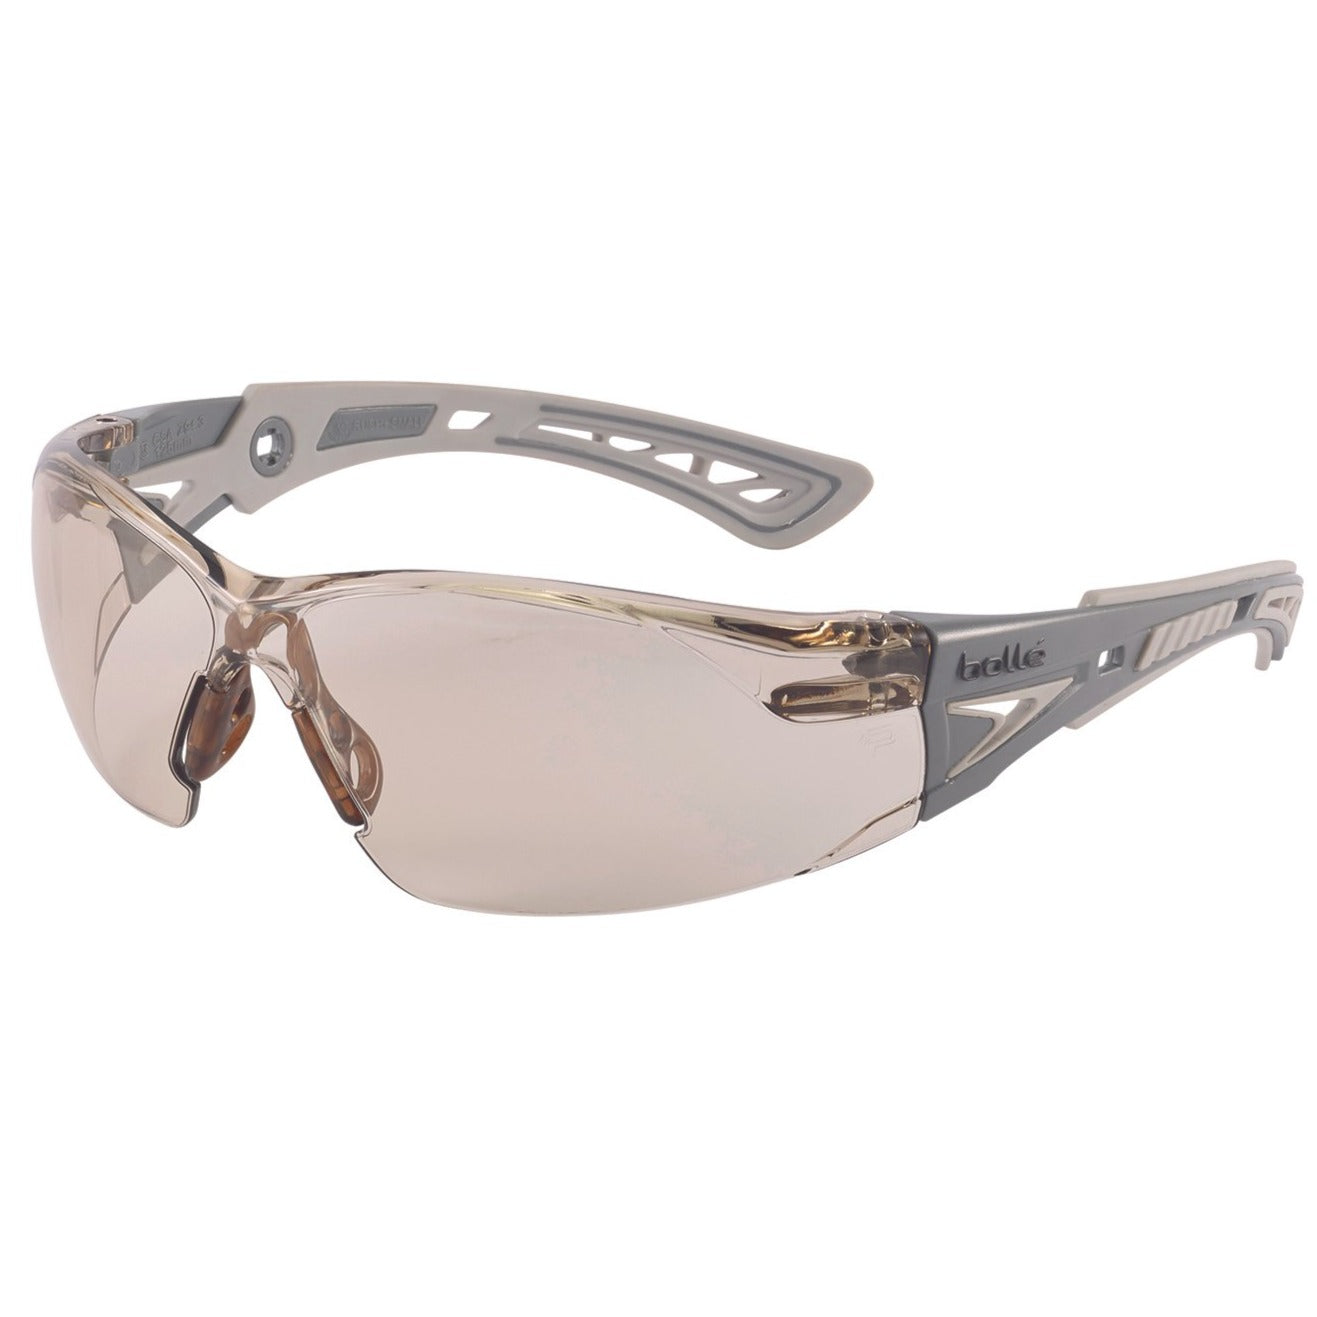 Bolle safety glasses, bolle rush + csp lens